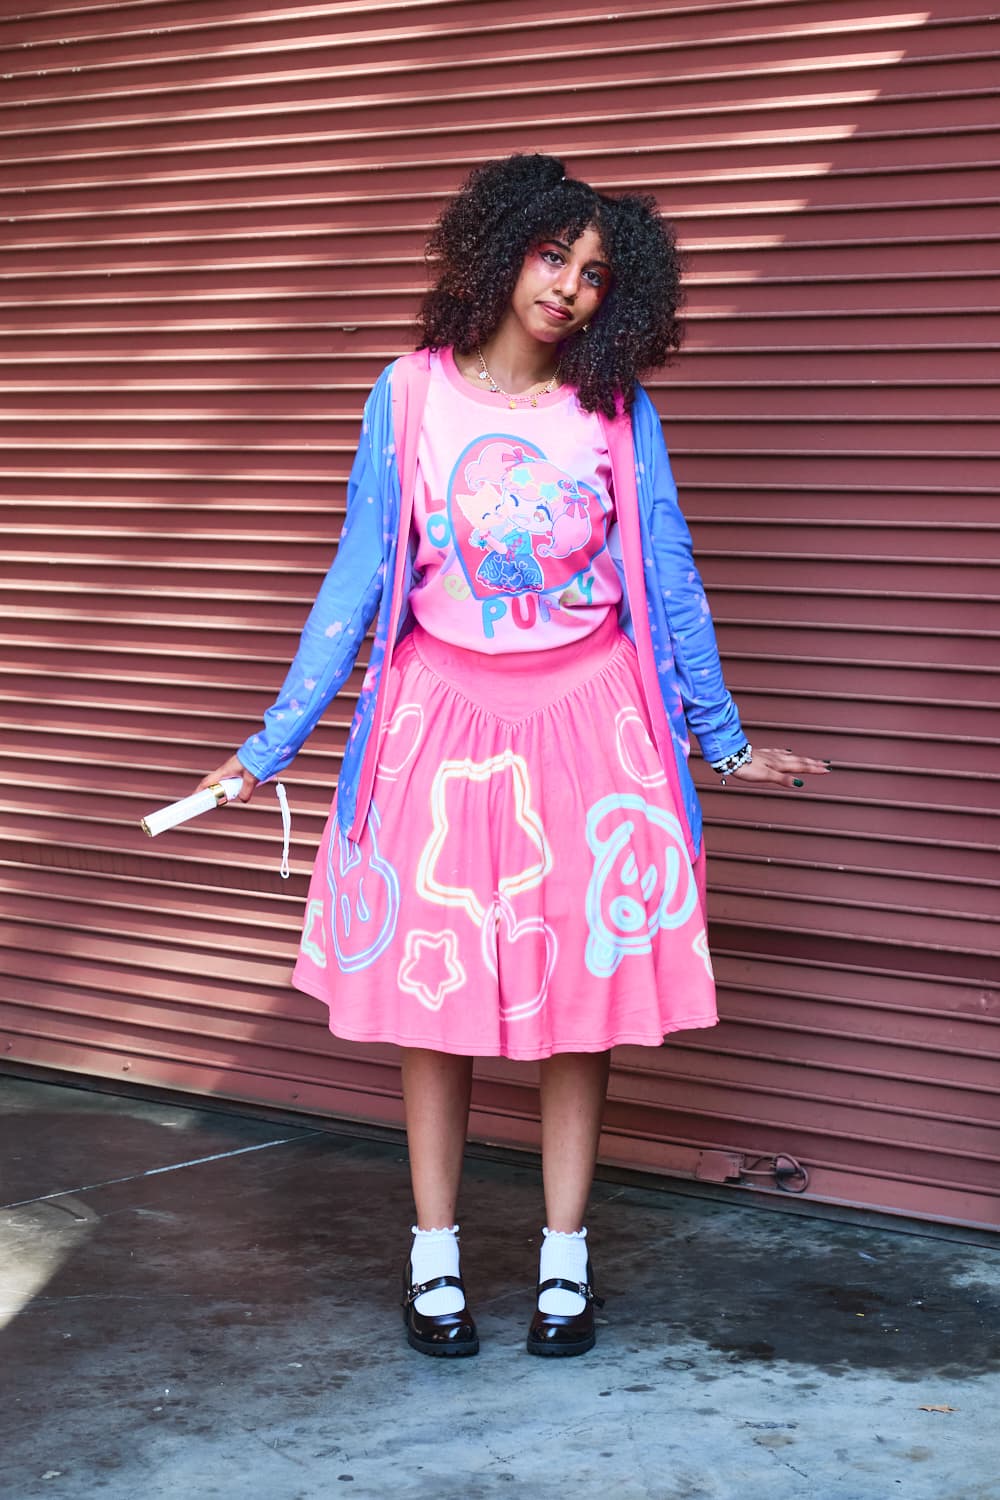 Cute model wearing blue and pink cardigan with pink heart T-shirt and pink circle skirt with neon light motifs - full body pose 4.